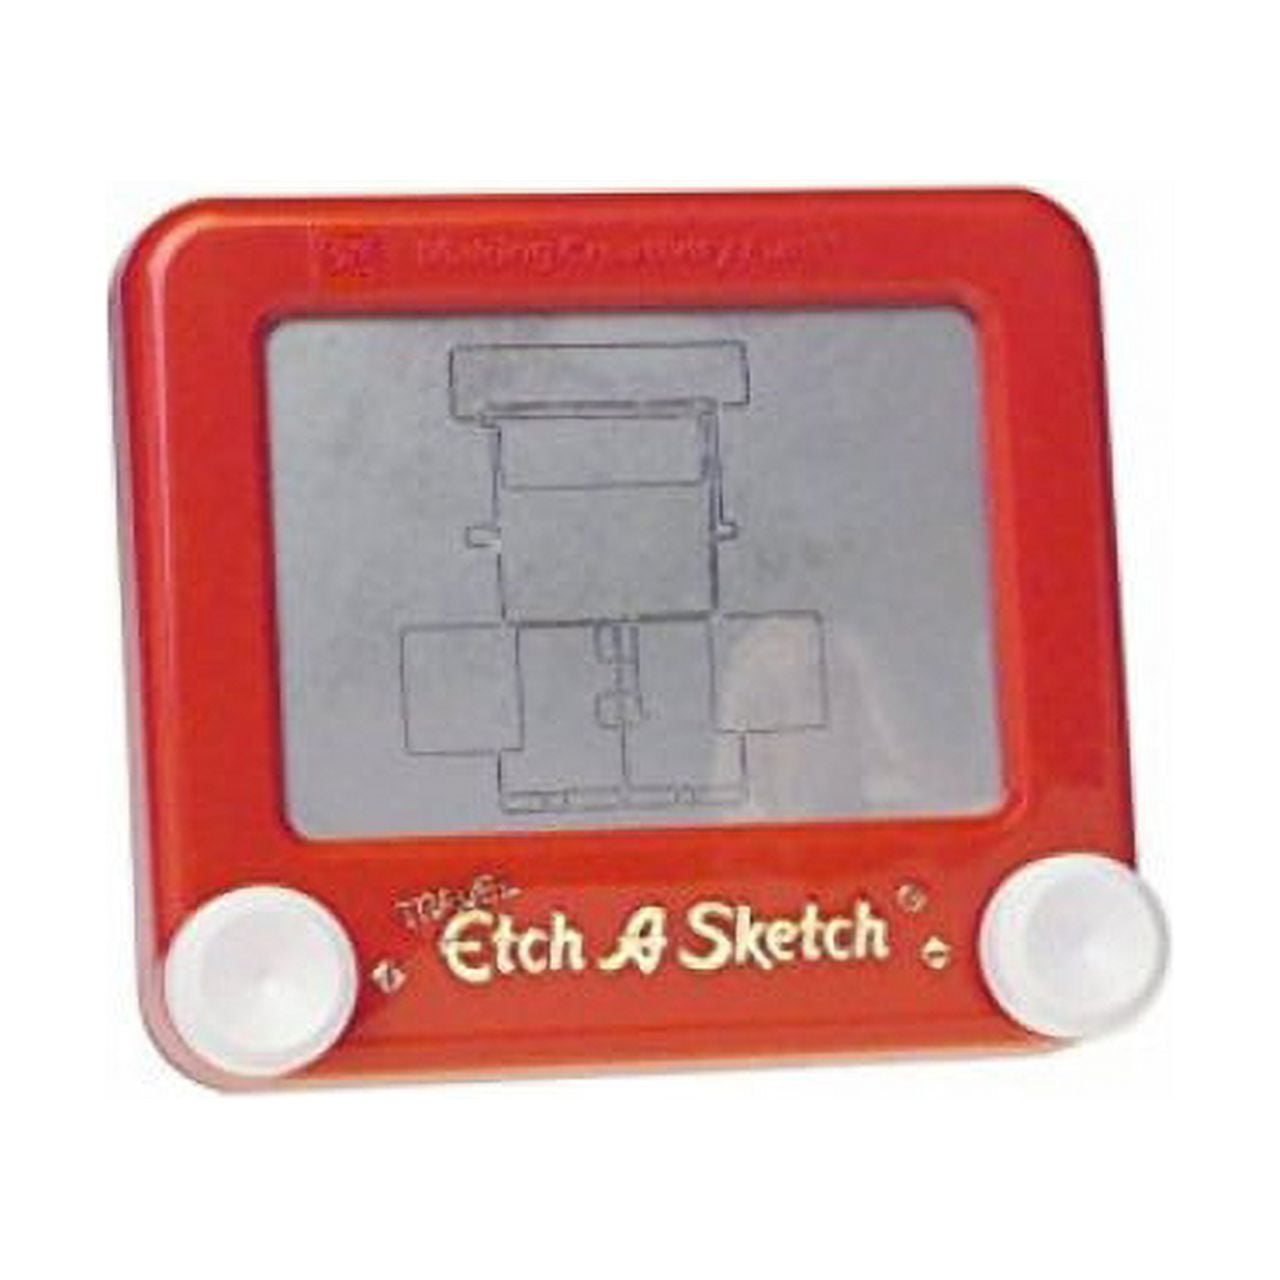 Etch a sketch animator I thought I was the bomb bringing my art to life :  r/80s